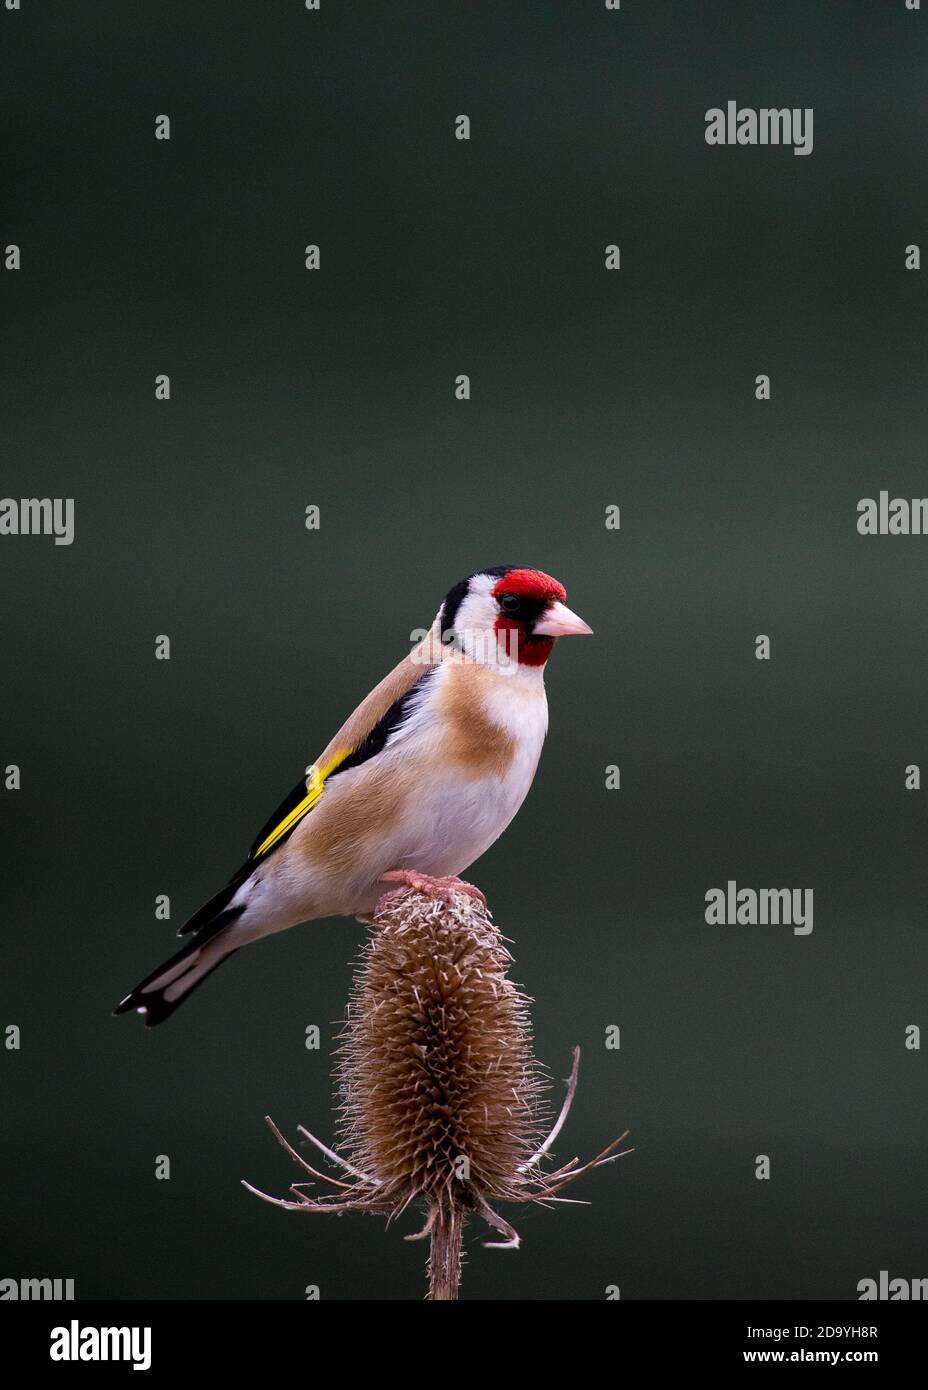 Goldfinch perched on Teasel Stock Photo